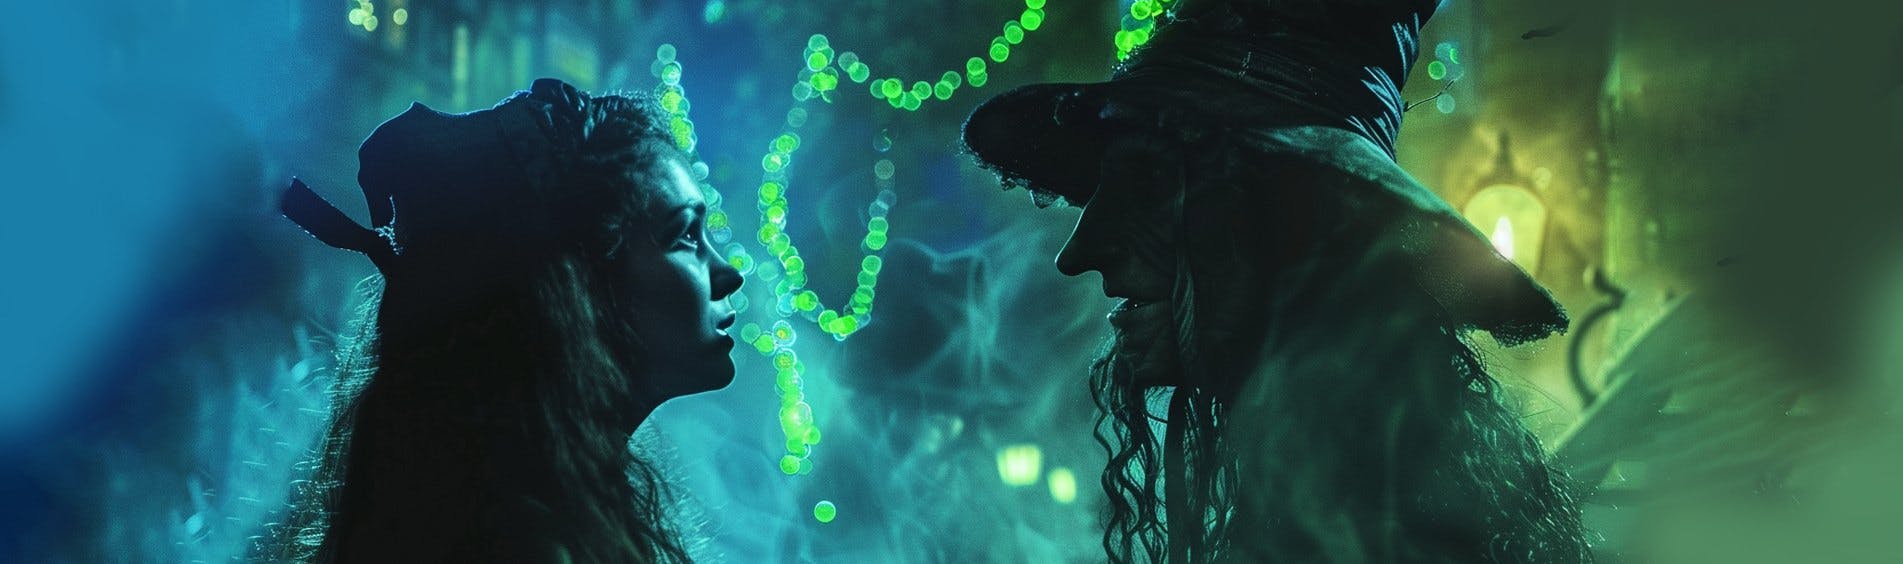 Cover Image for “Wicked” Trailer Is About To Release: Fans Cannot Keep Calm